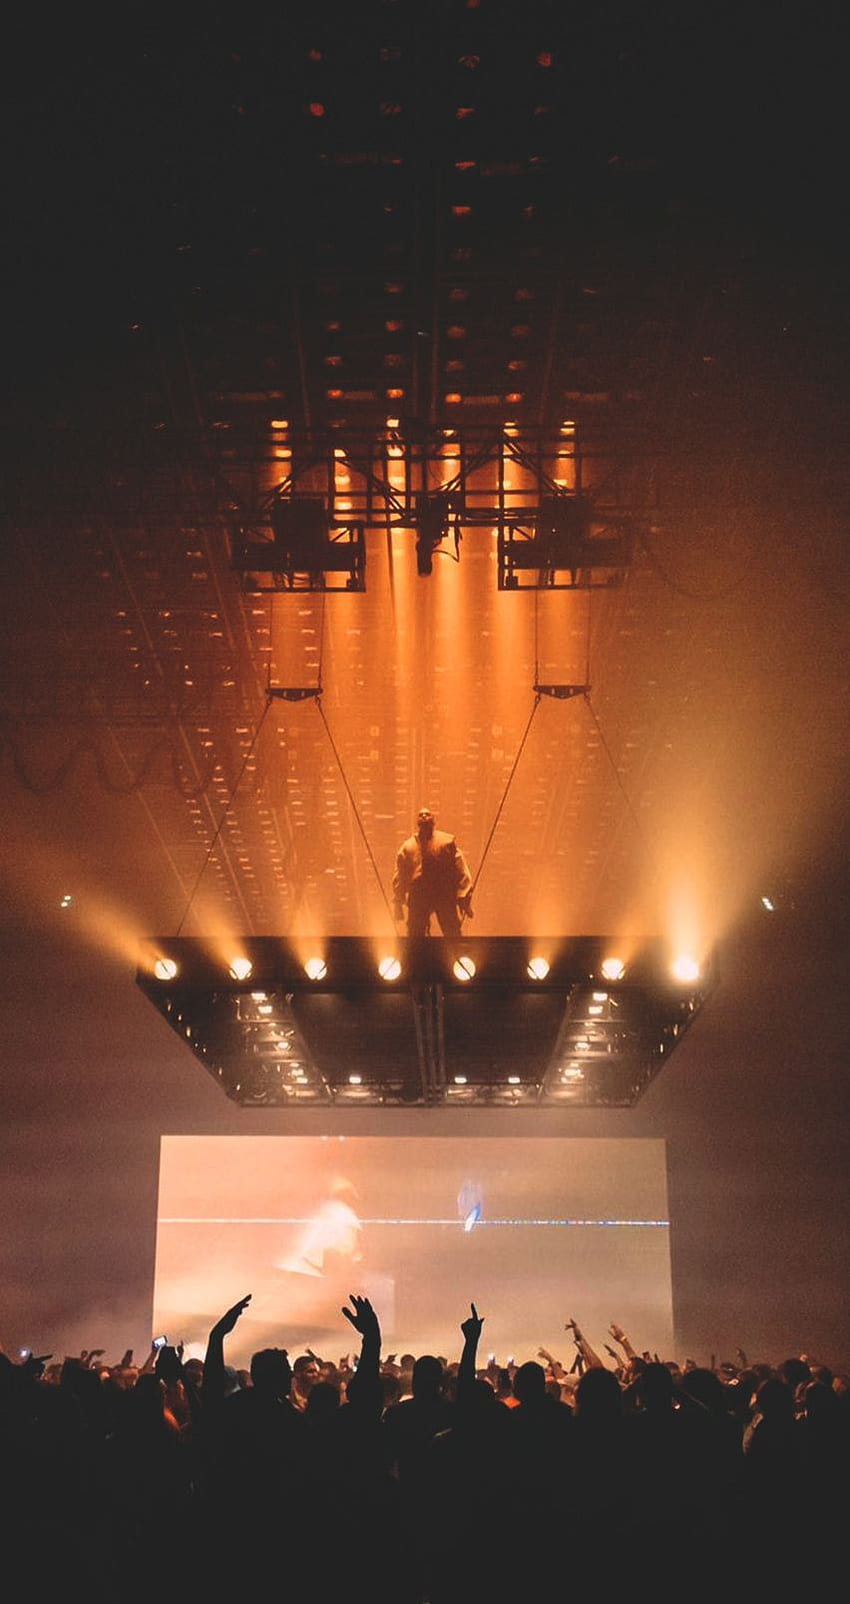 One More Cup of Coffee. welovekanyewest: Kanye West's Saint Pablo Tour. Kanye west , Saint pablo tour, Stage set HD phone wallpaper